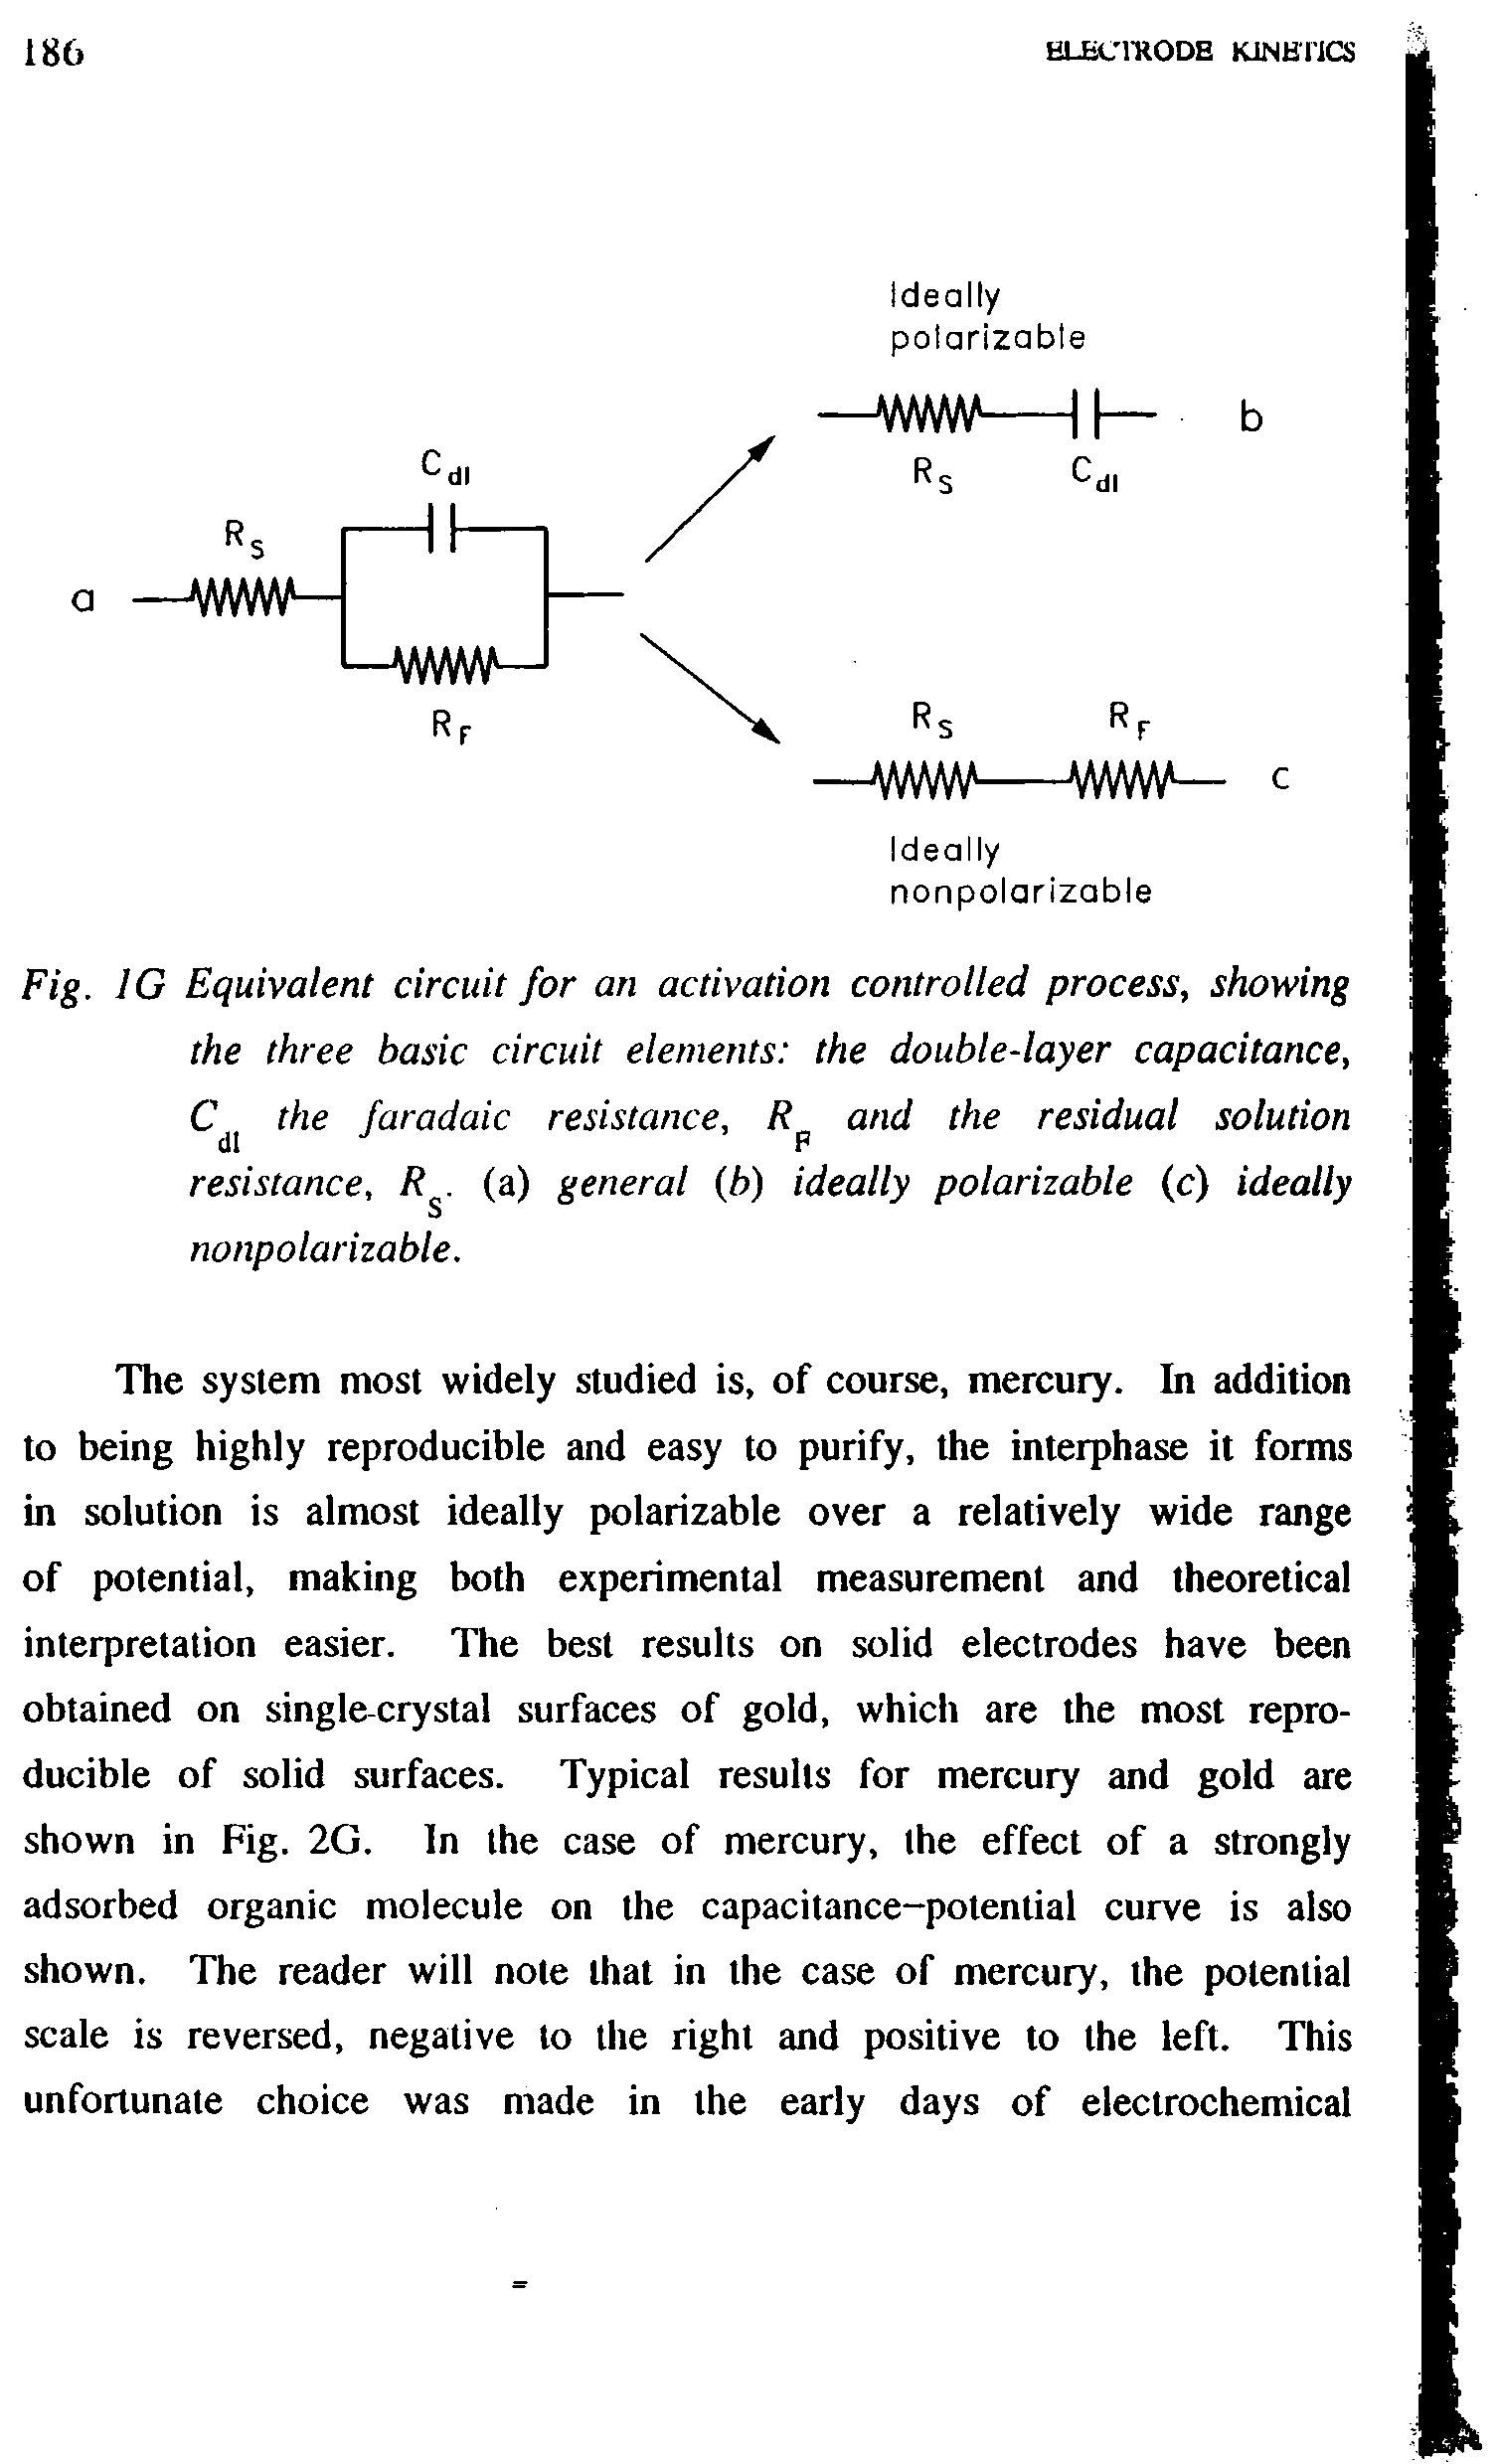 Fig. IG Equivalent circuit for an activation controlled process, showing the three basic circuit elements the double-layer capacitance,...